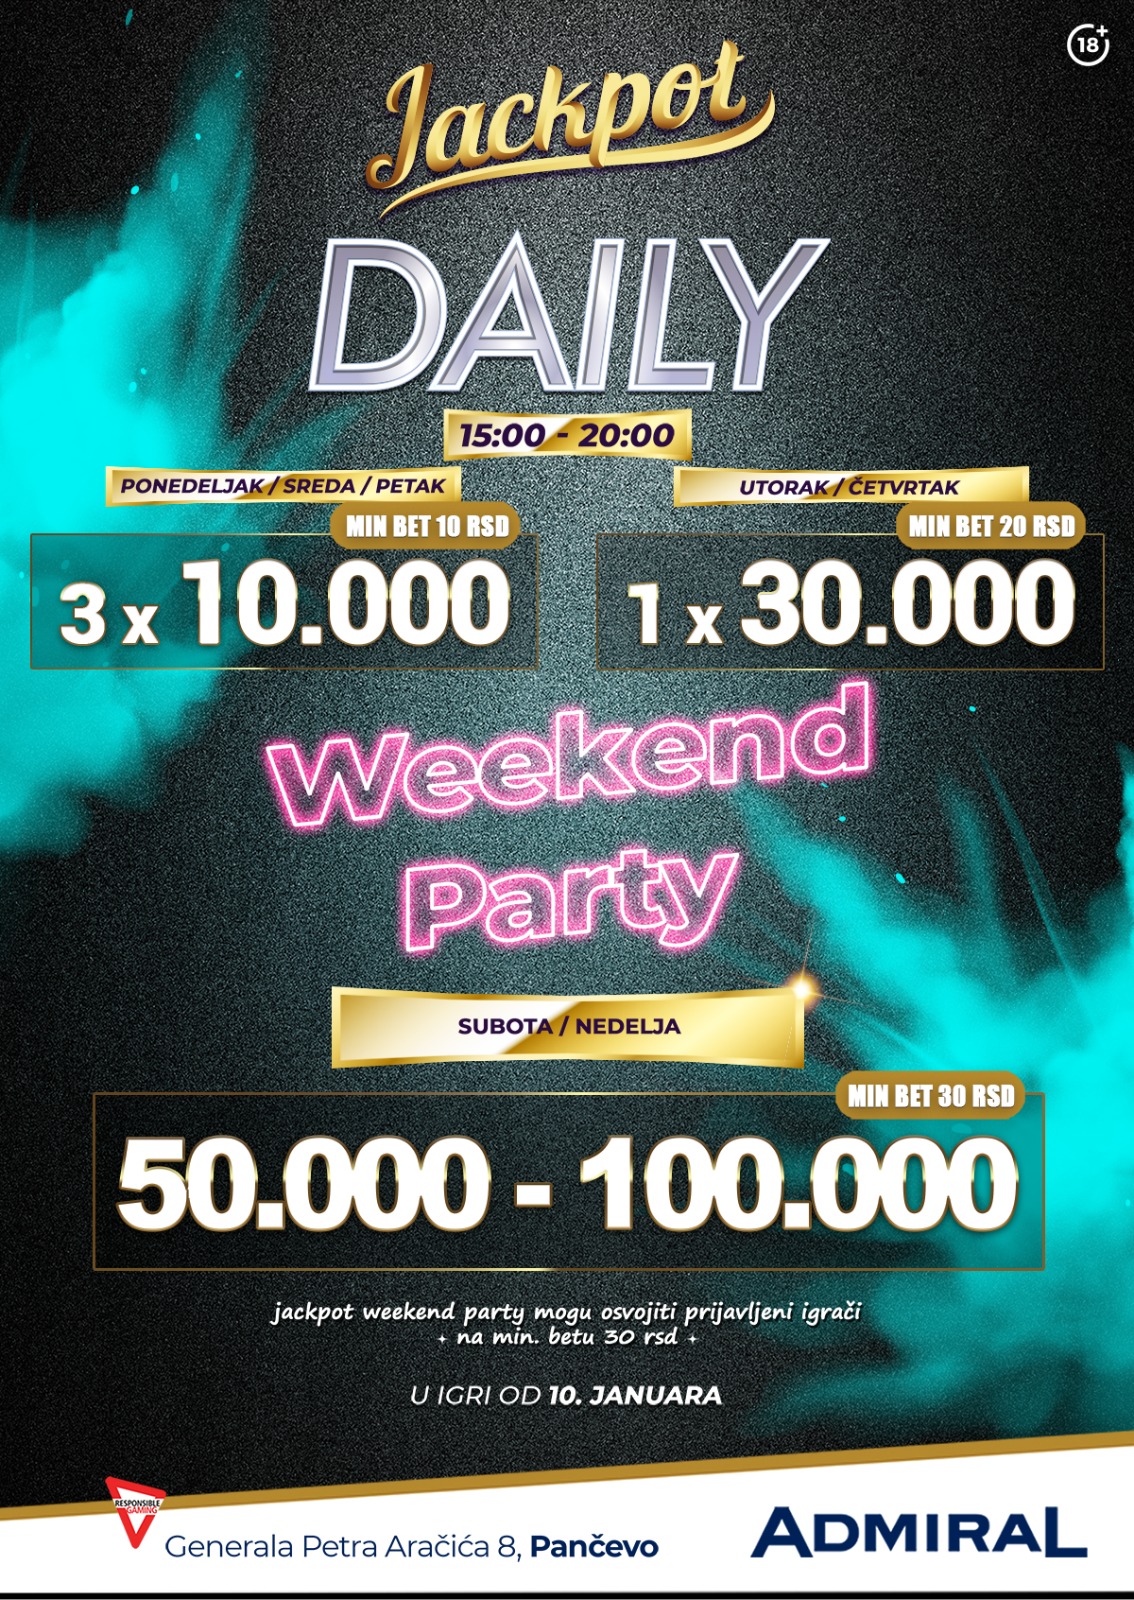 DAILY&WEEKEND PARTY JACKPOT